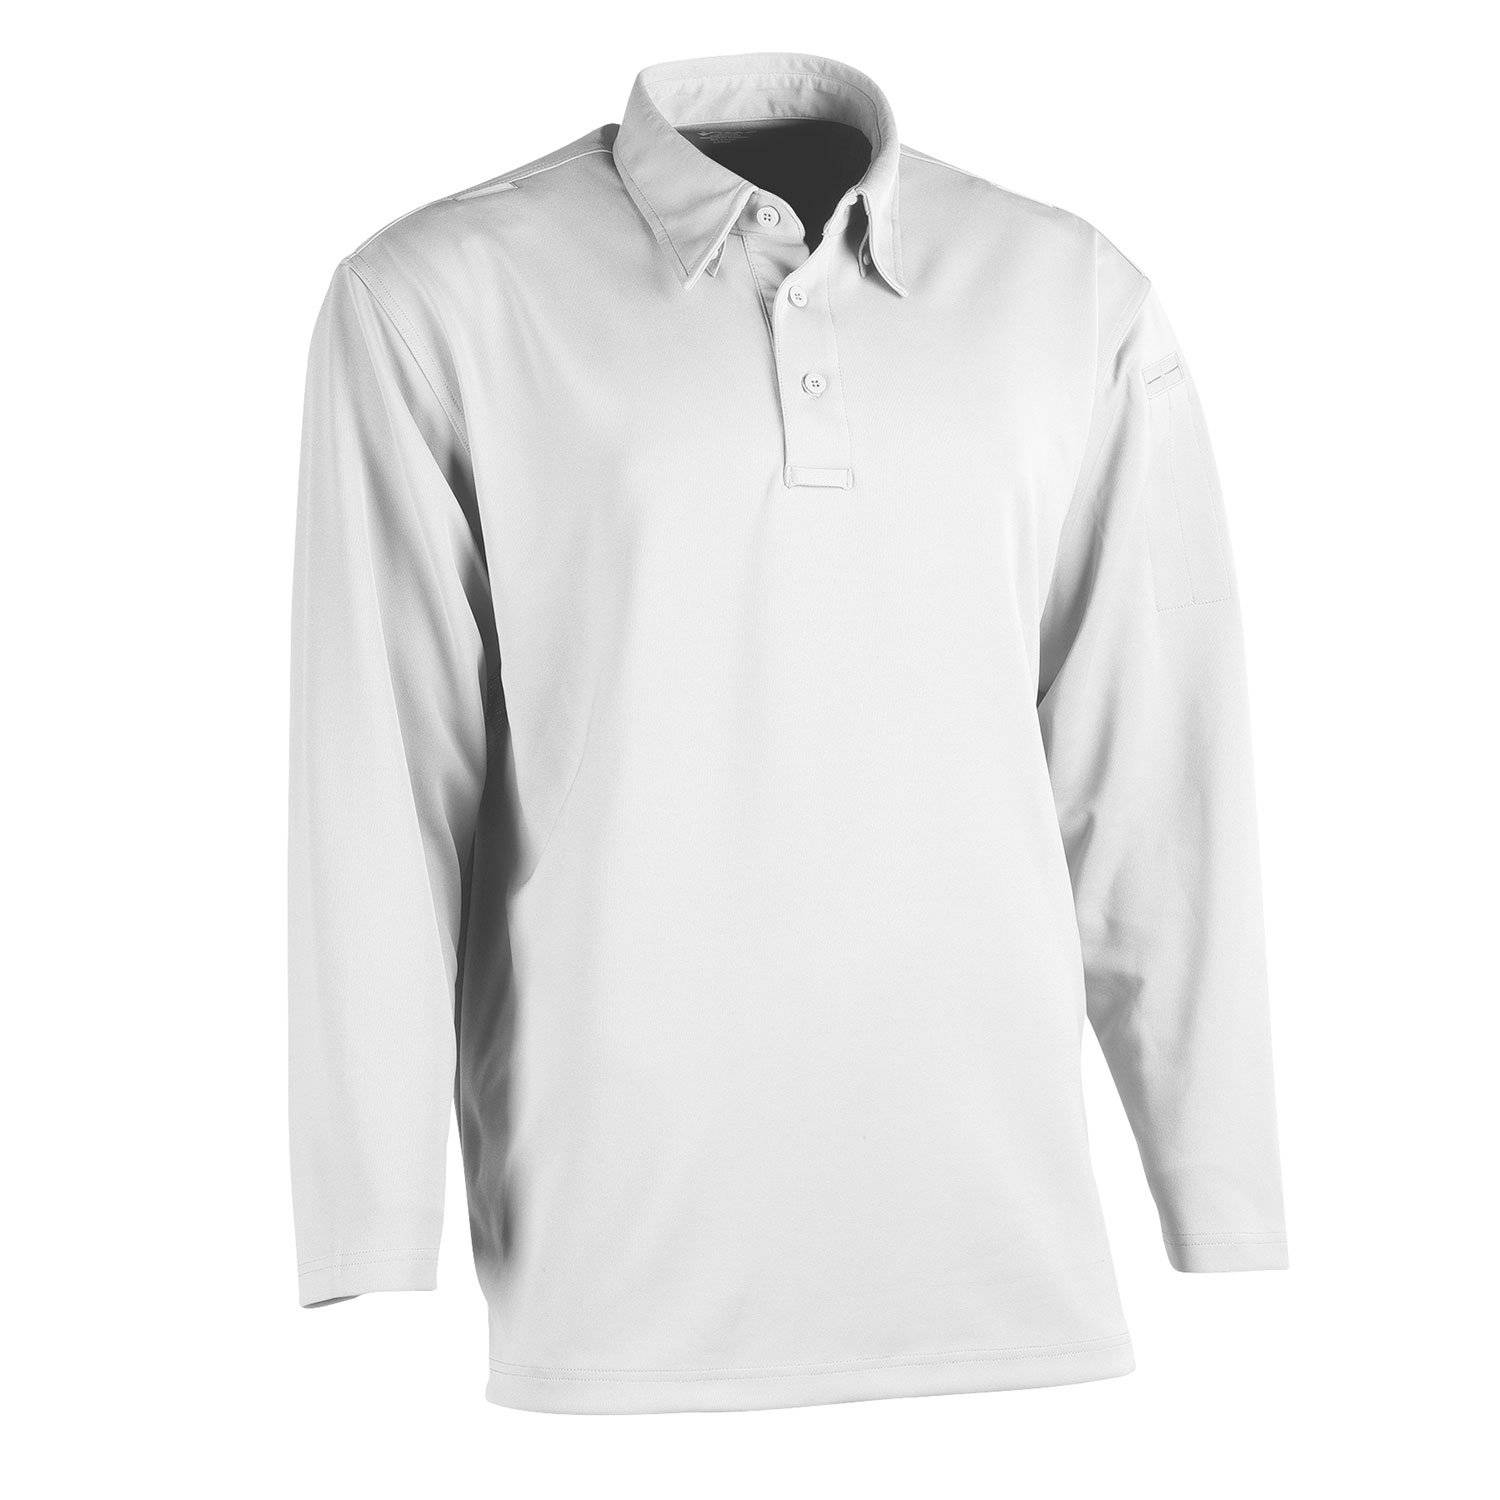 Galls Mens Long Sleeve CoolBest II Performance Polo